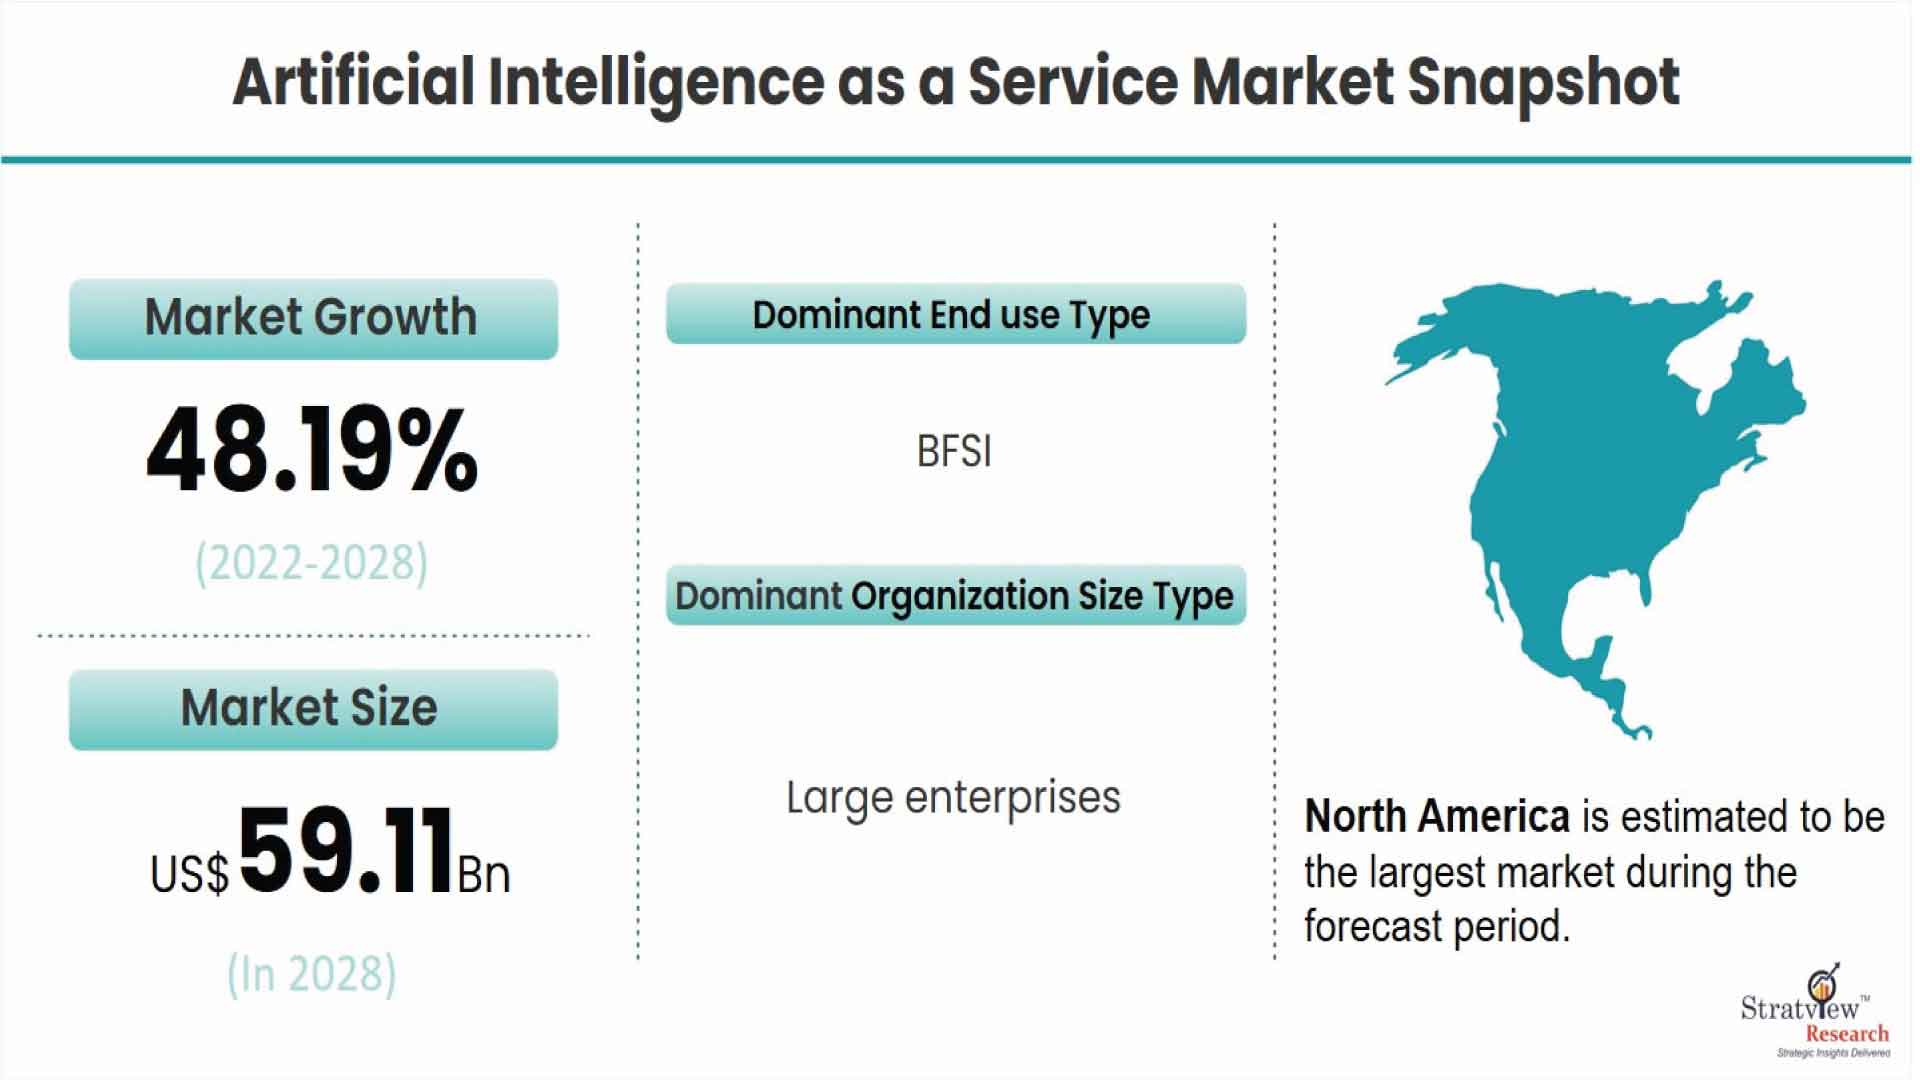 Artificial Intelligence as a Service Market is Projected to Reach US$ 59.11 Billion in 2028